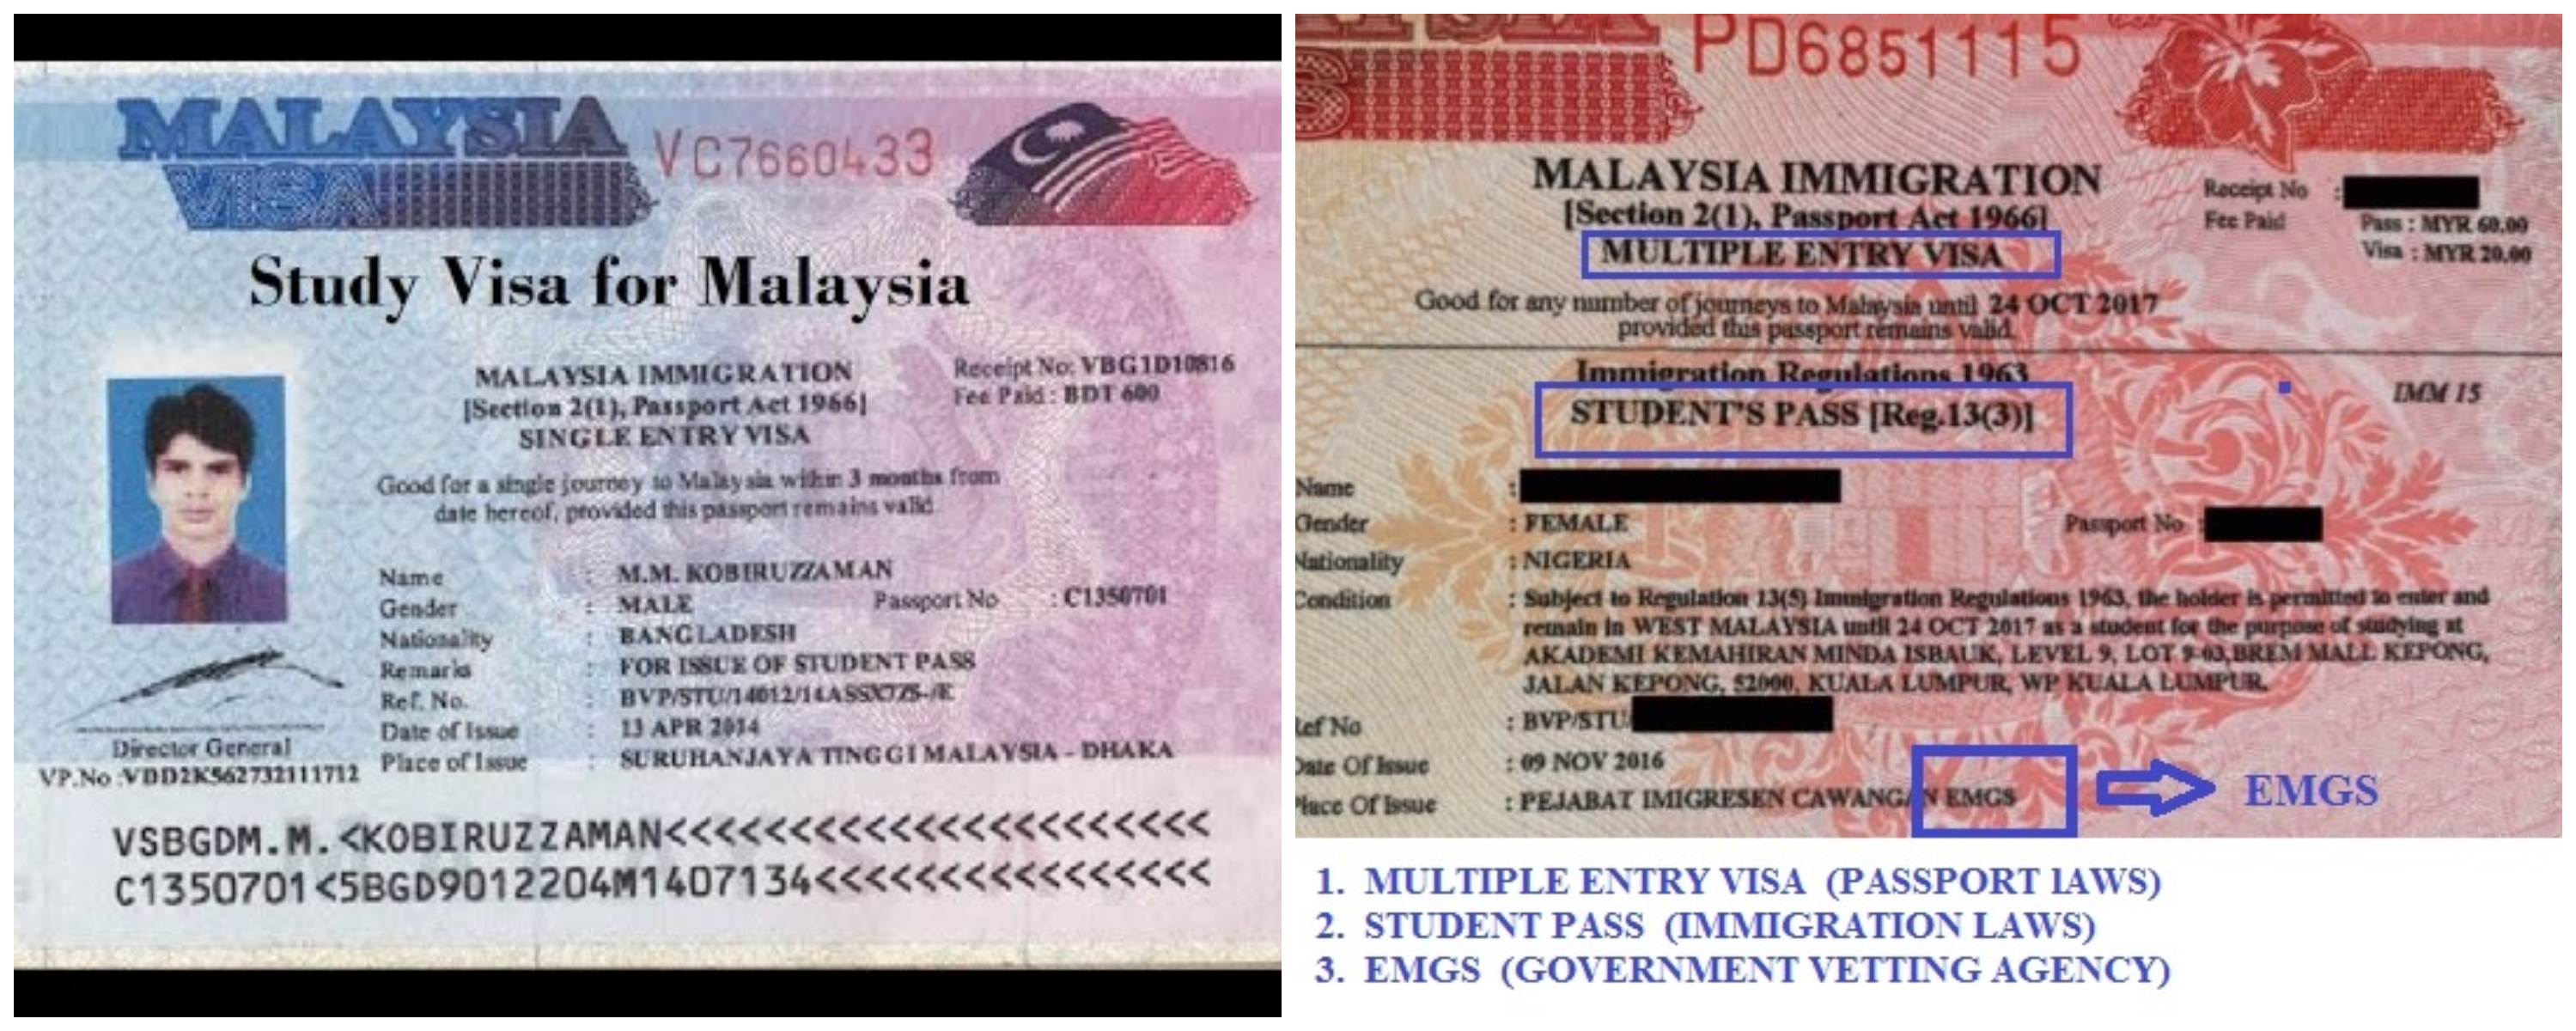 Visa (left) and student pass (right). Images from Haor Konna YouTube and Quora